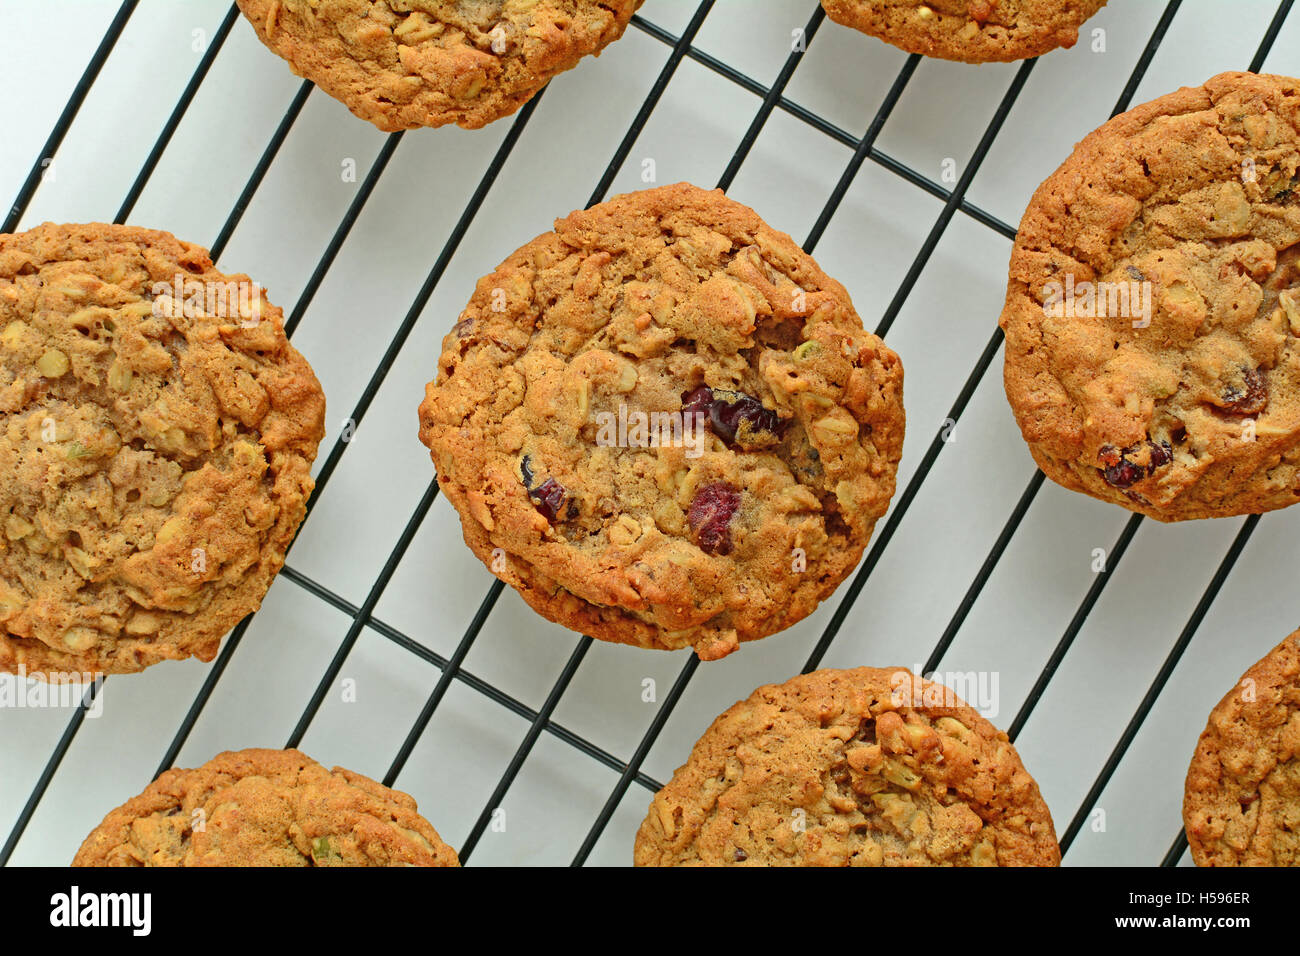 Fresh baked oatmeal raisin walnut cookies on black cooling rack shot from overhead in horizontal format Stock Photo